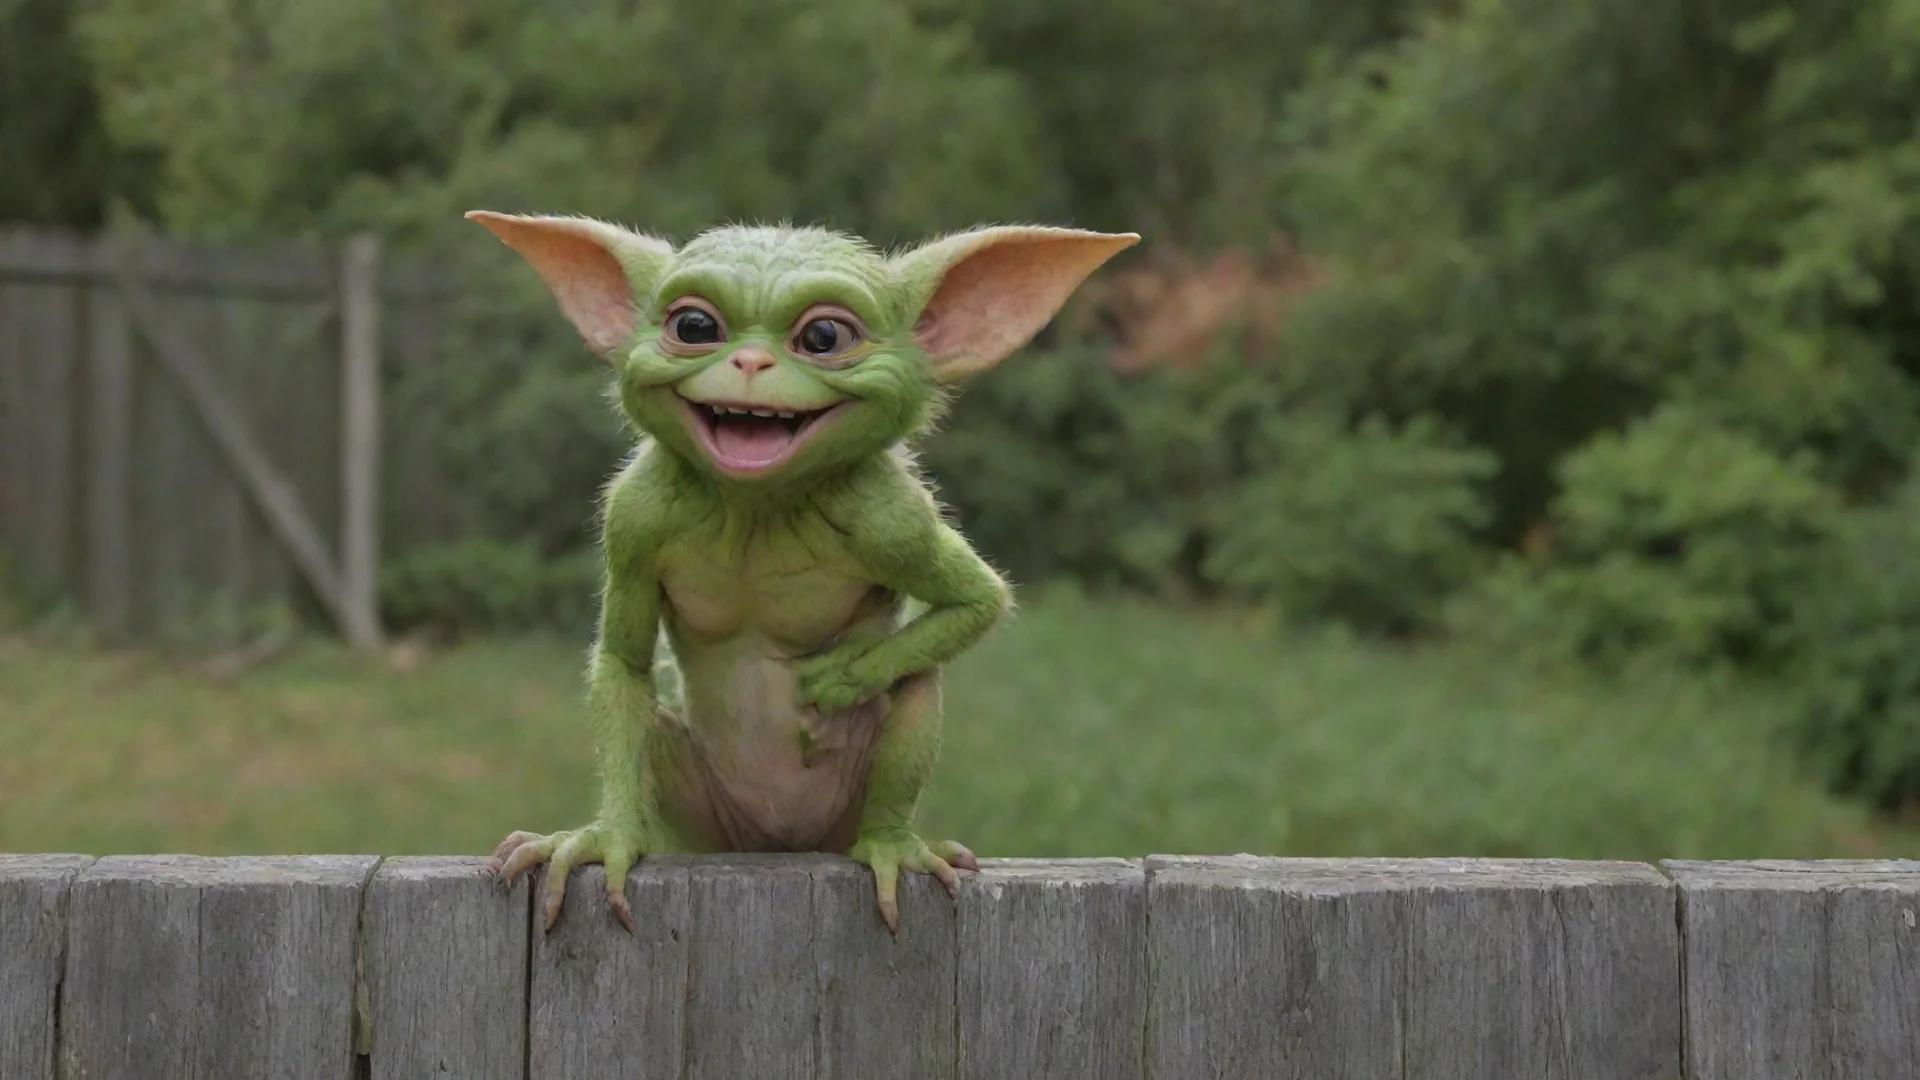 aiamazing gremlin sitting on a fence smiling awesome portrait 2 wide